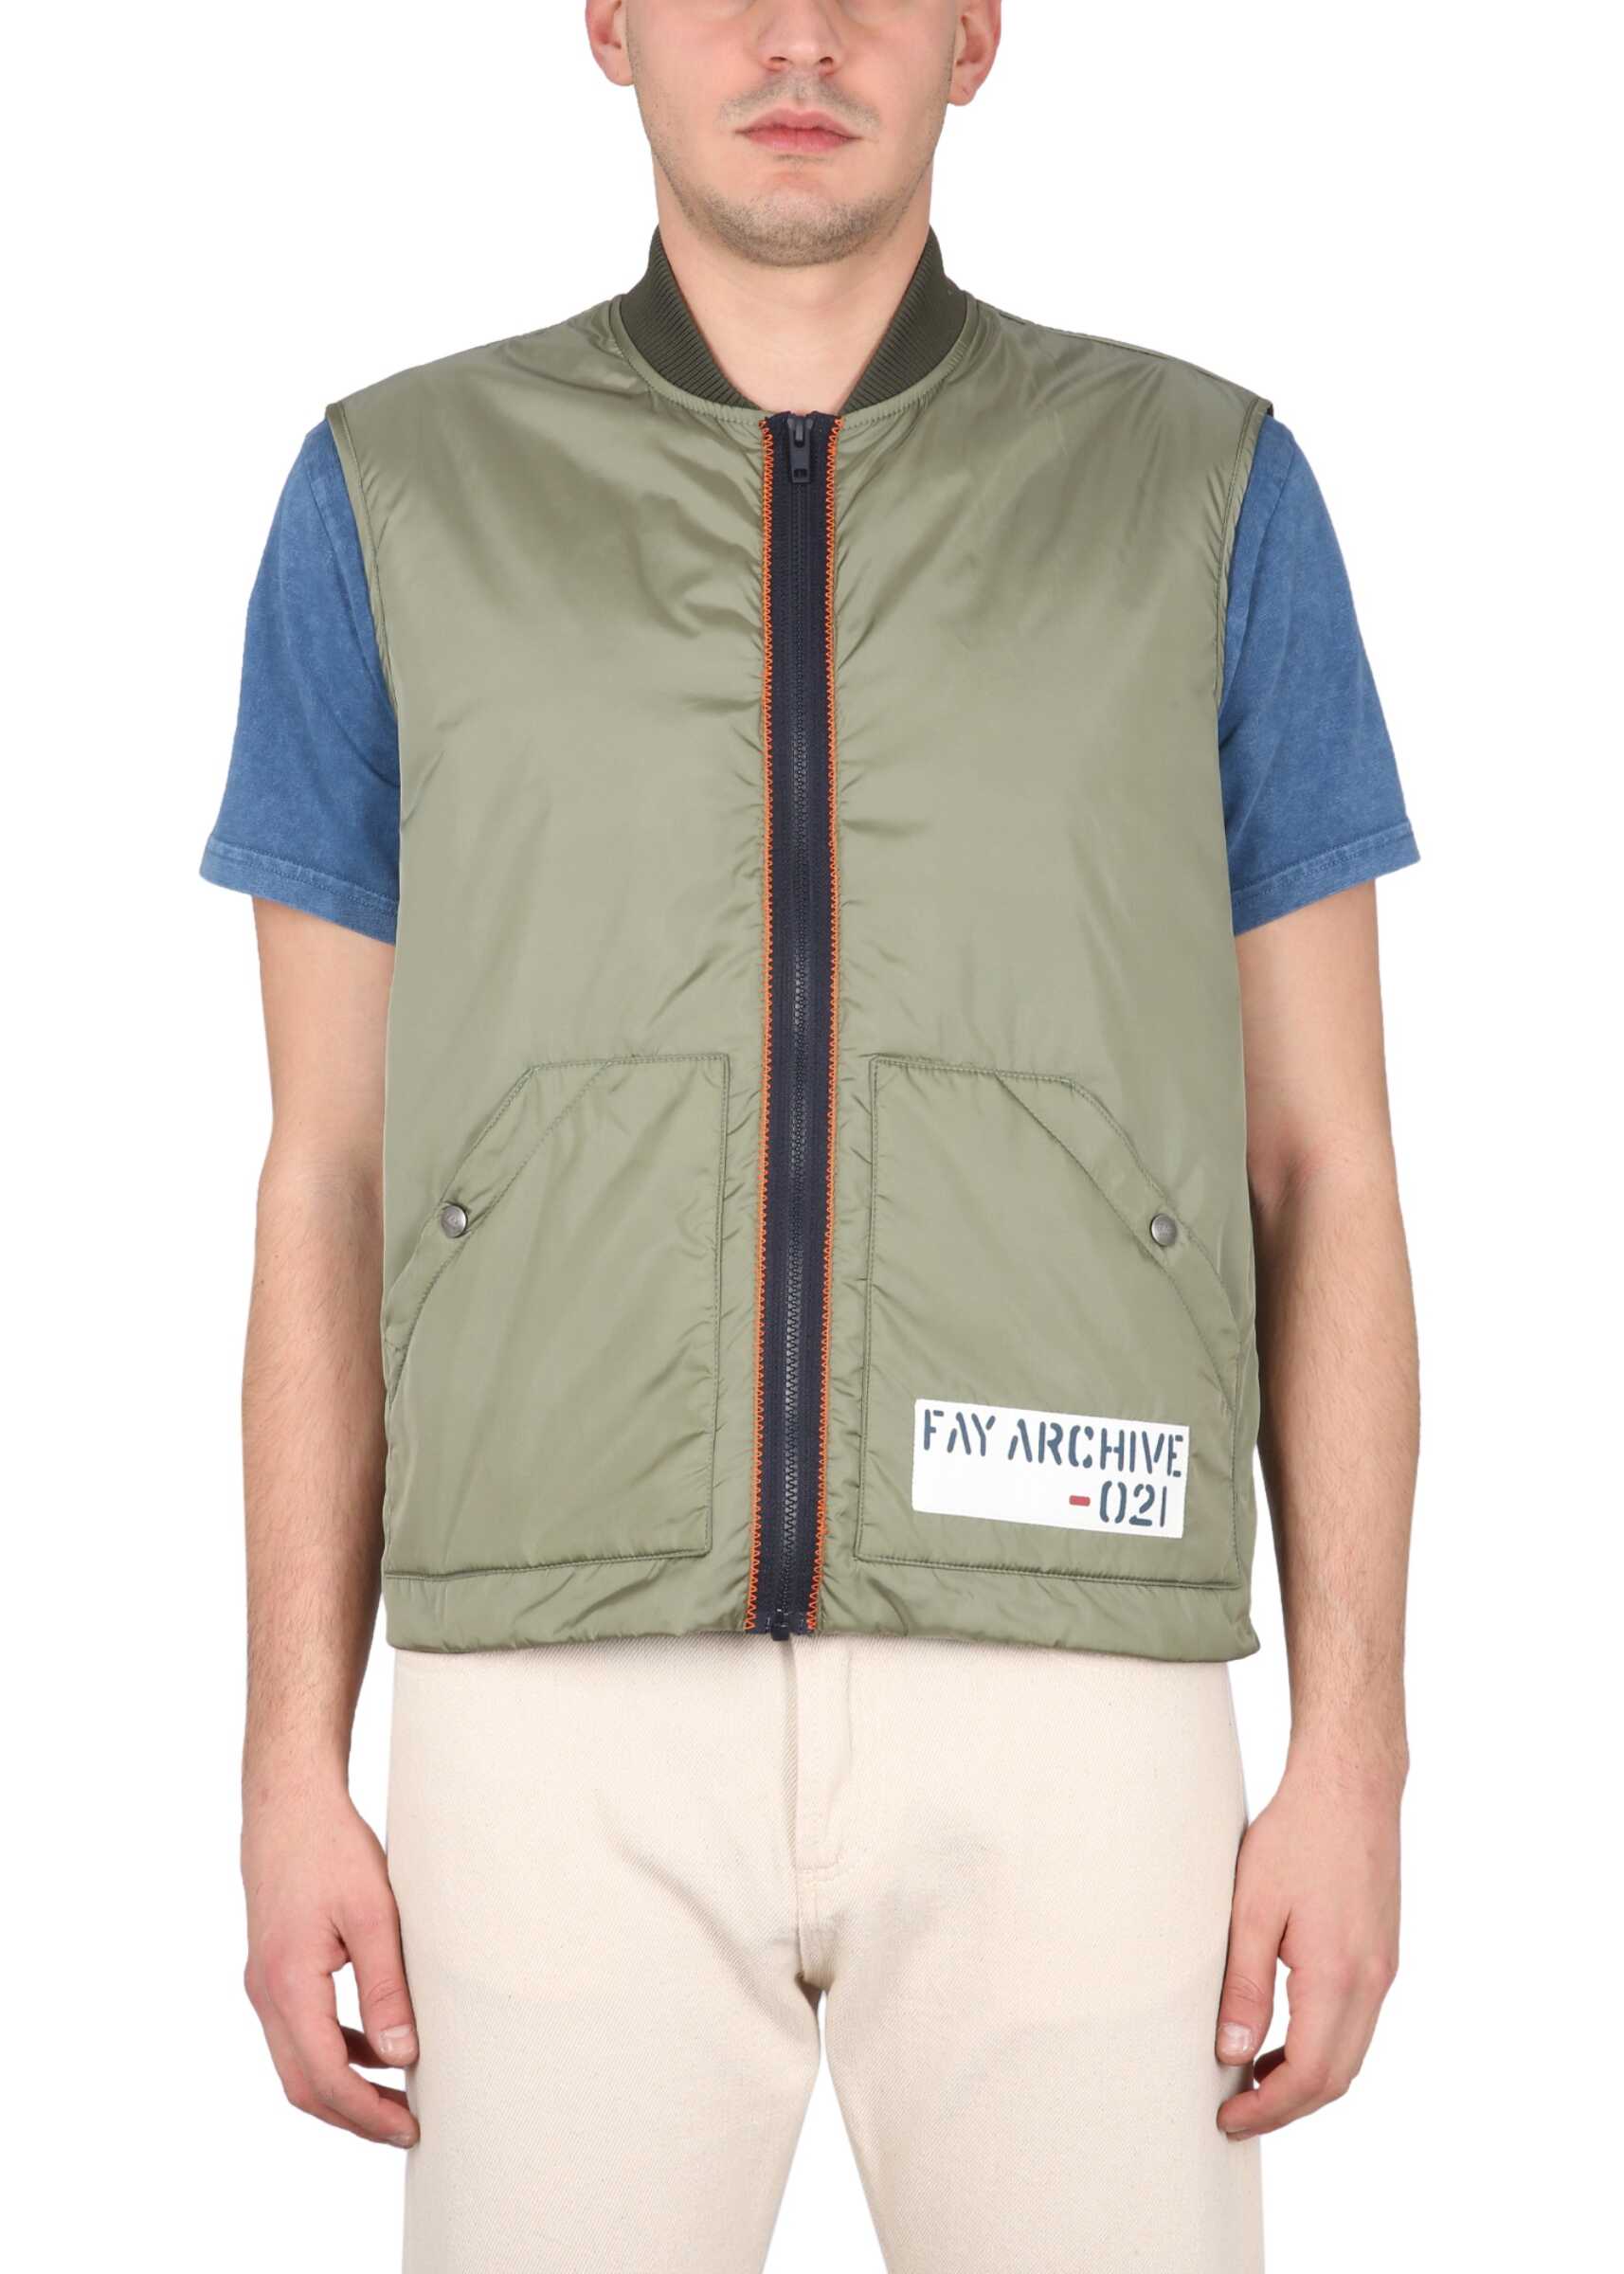 Fay Archive Vest. MILITARY GREEN Archive"